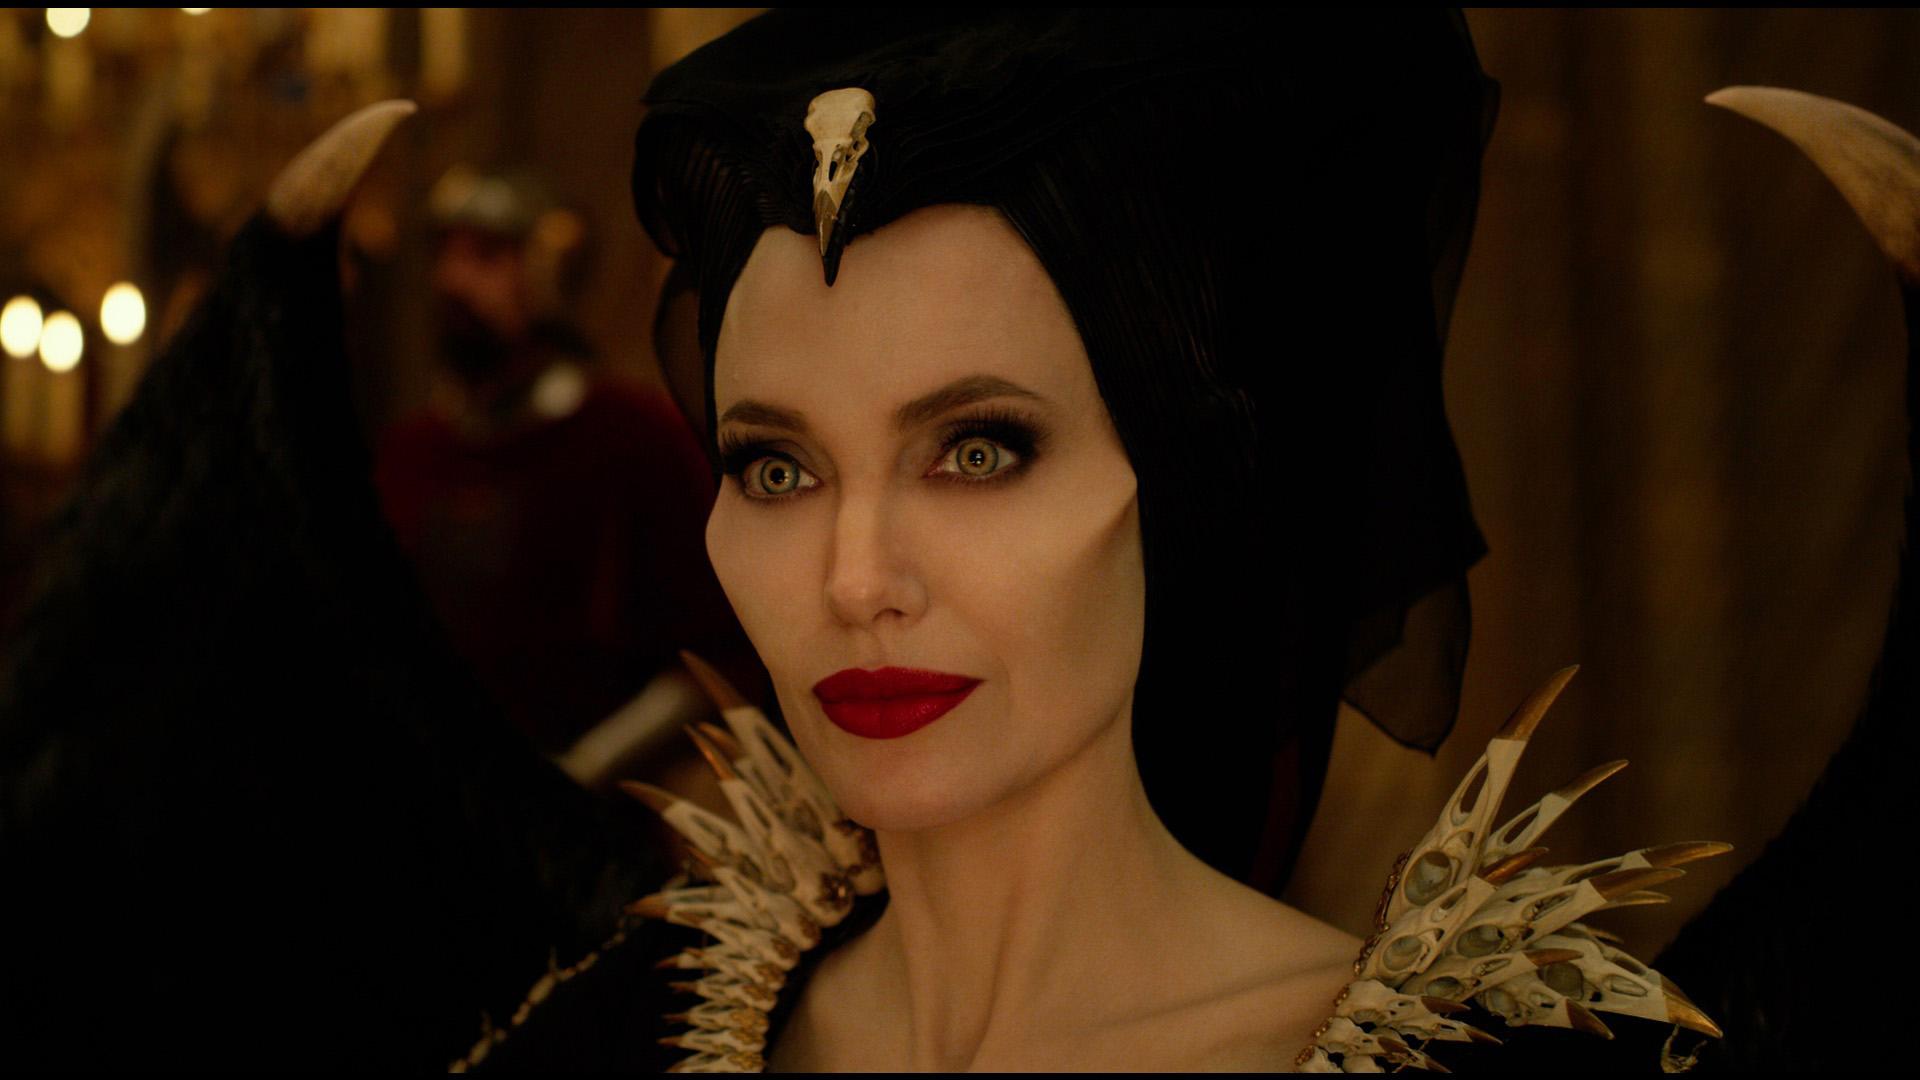 Is Maleficent: Mistress of Evil a worthy sequel to the 2014